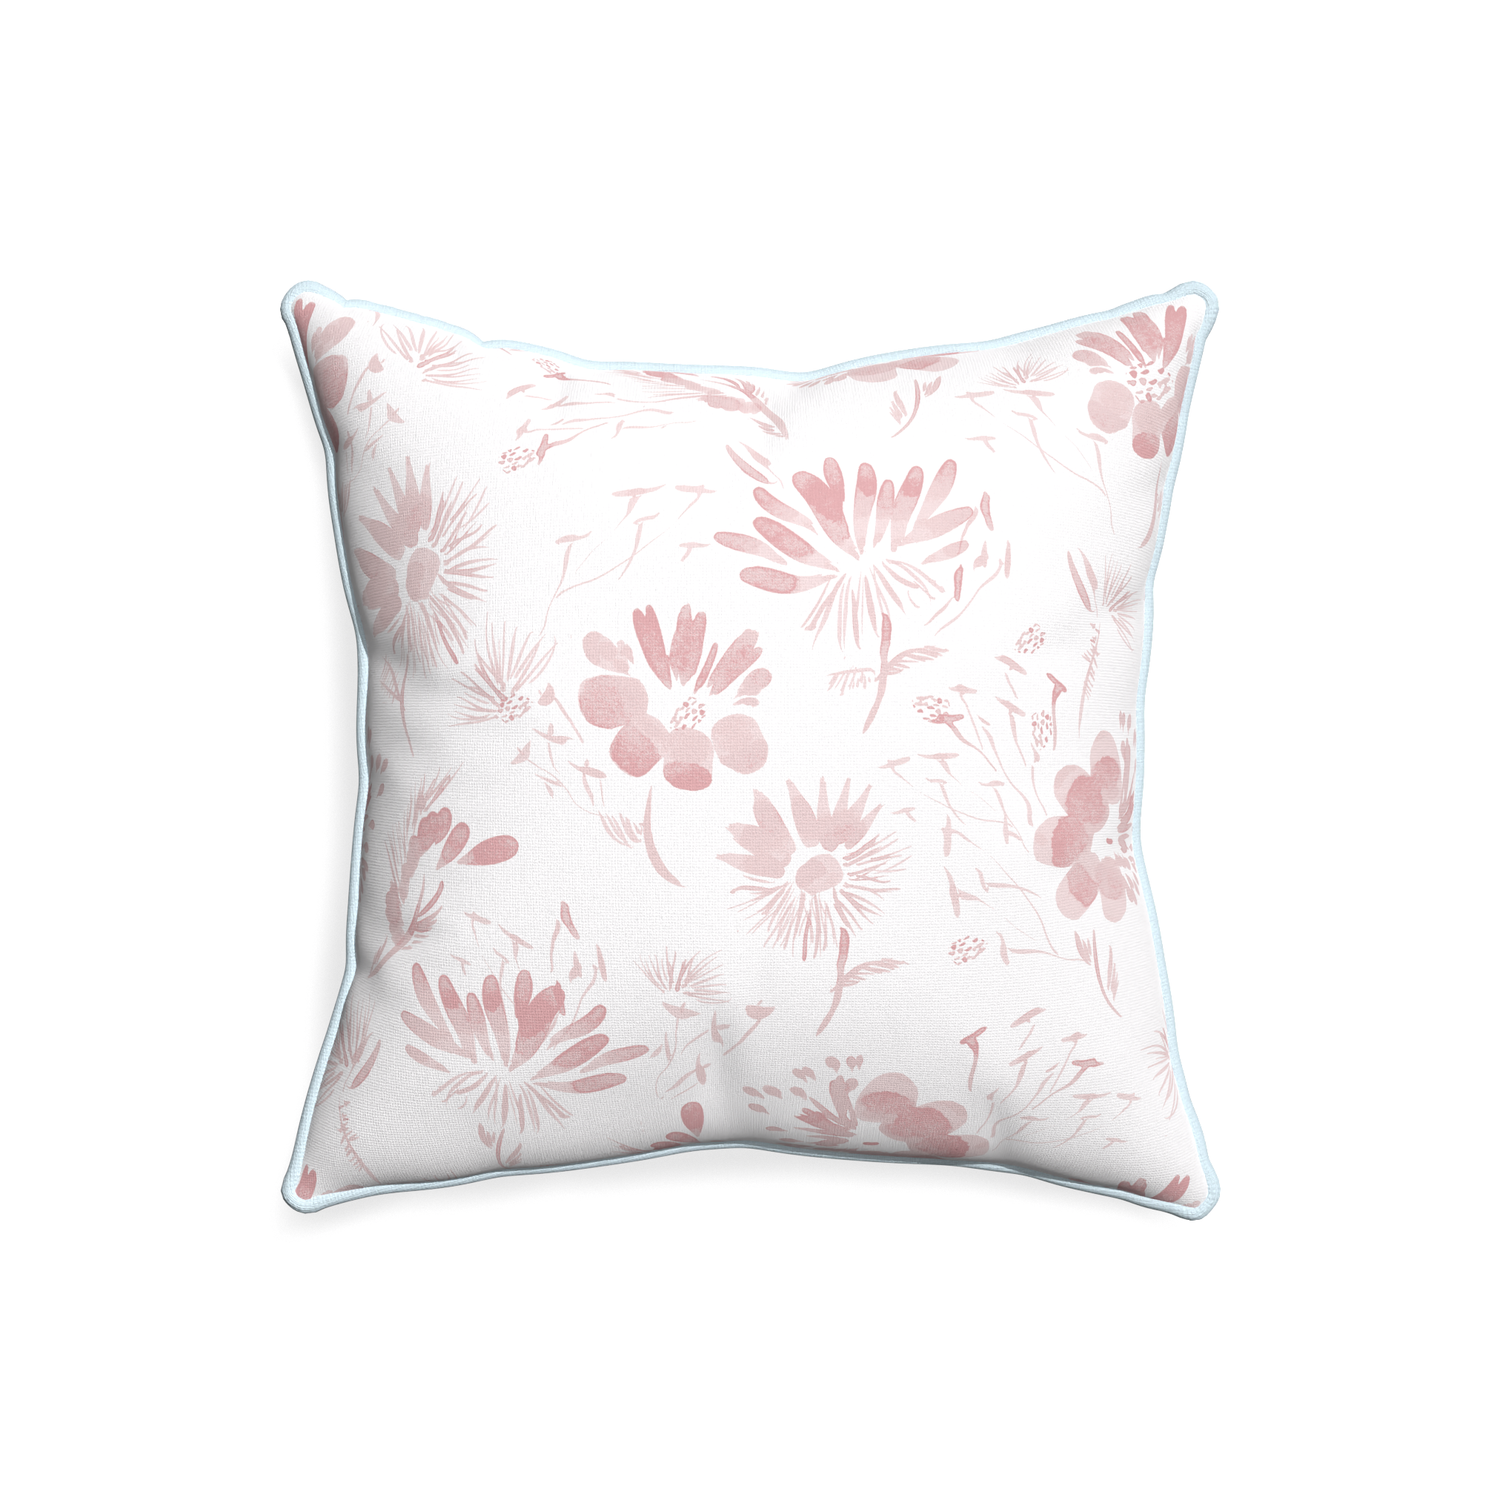 20-square blake custom pink floralpillow with powder piping on white background